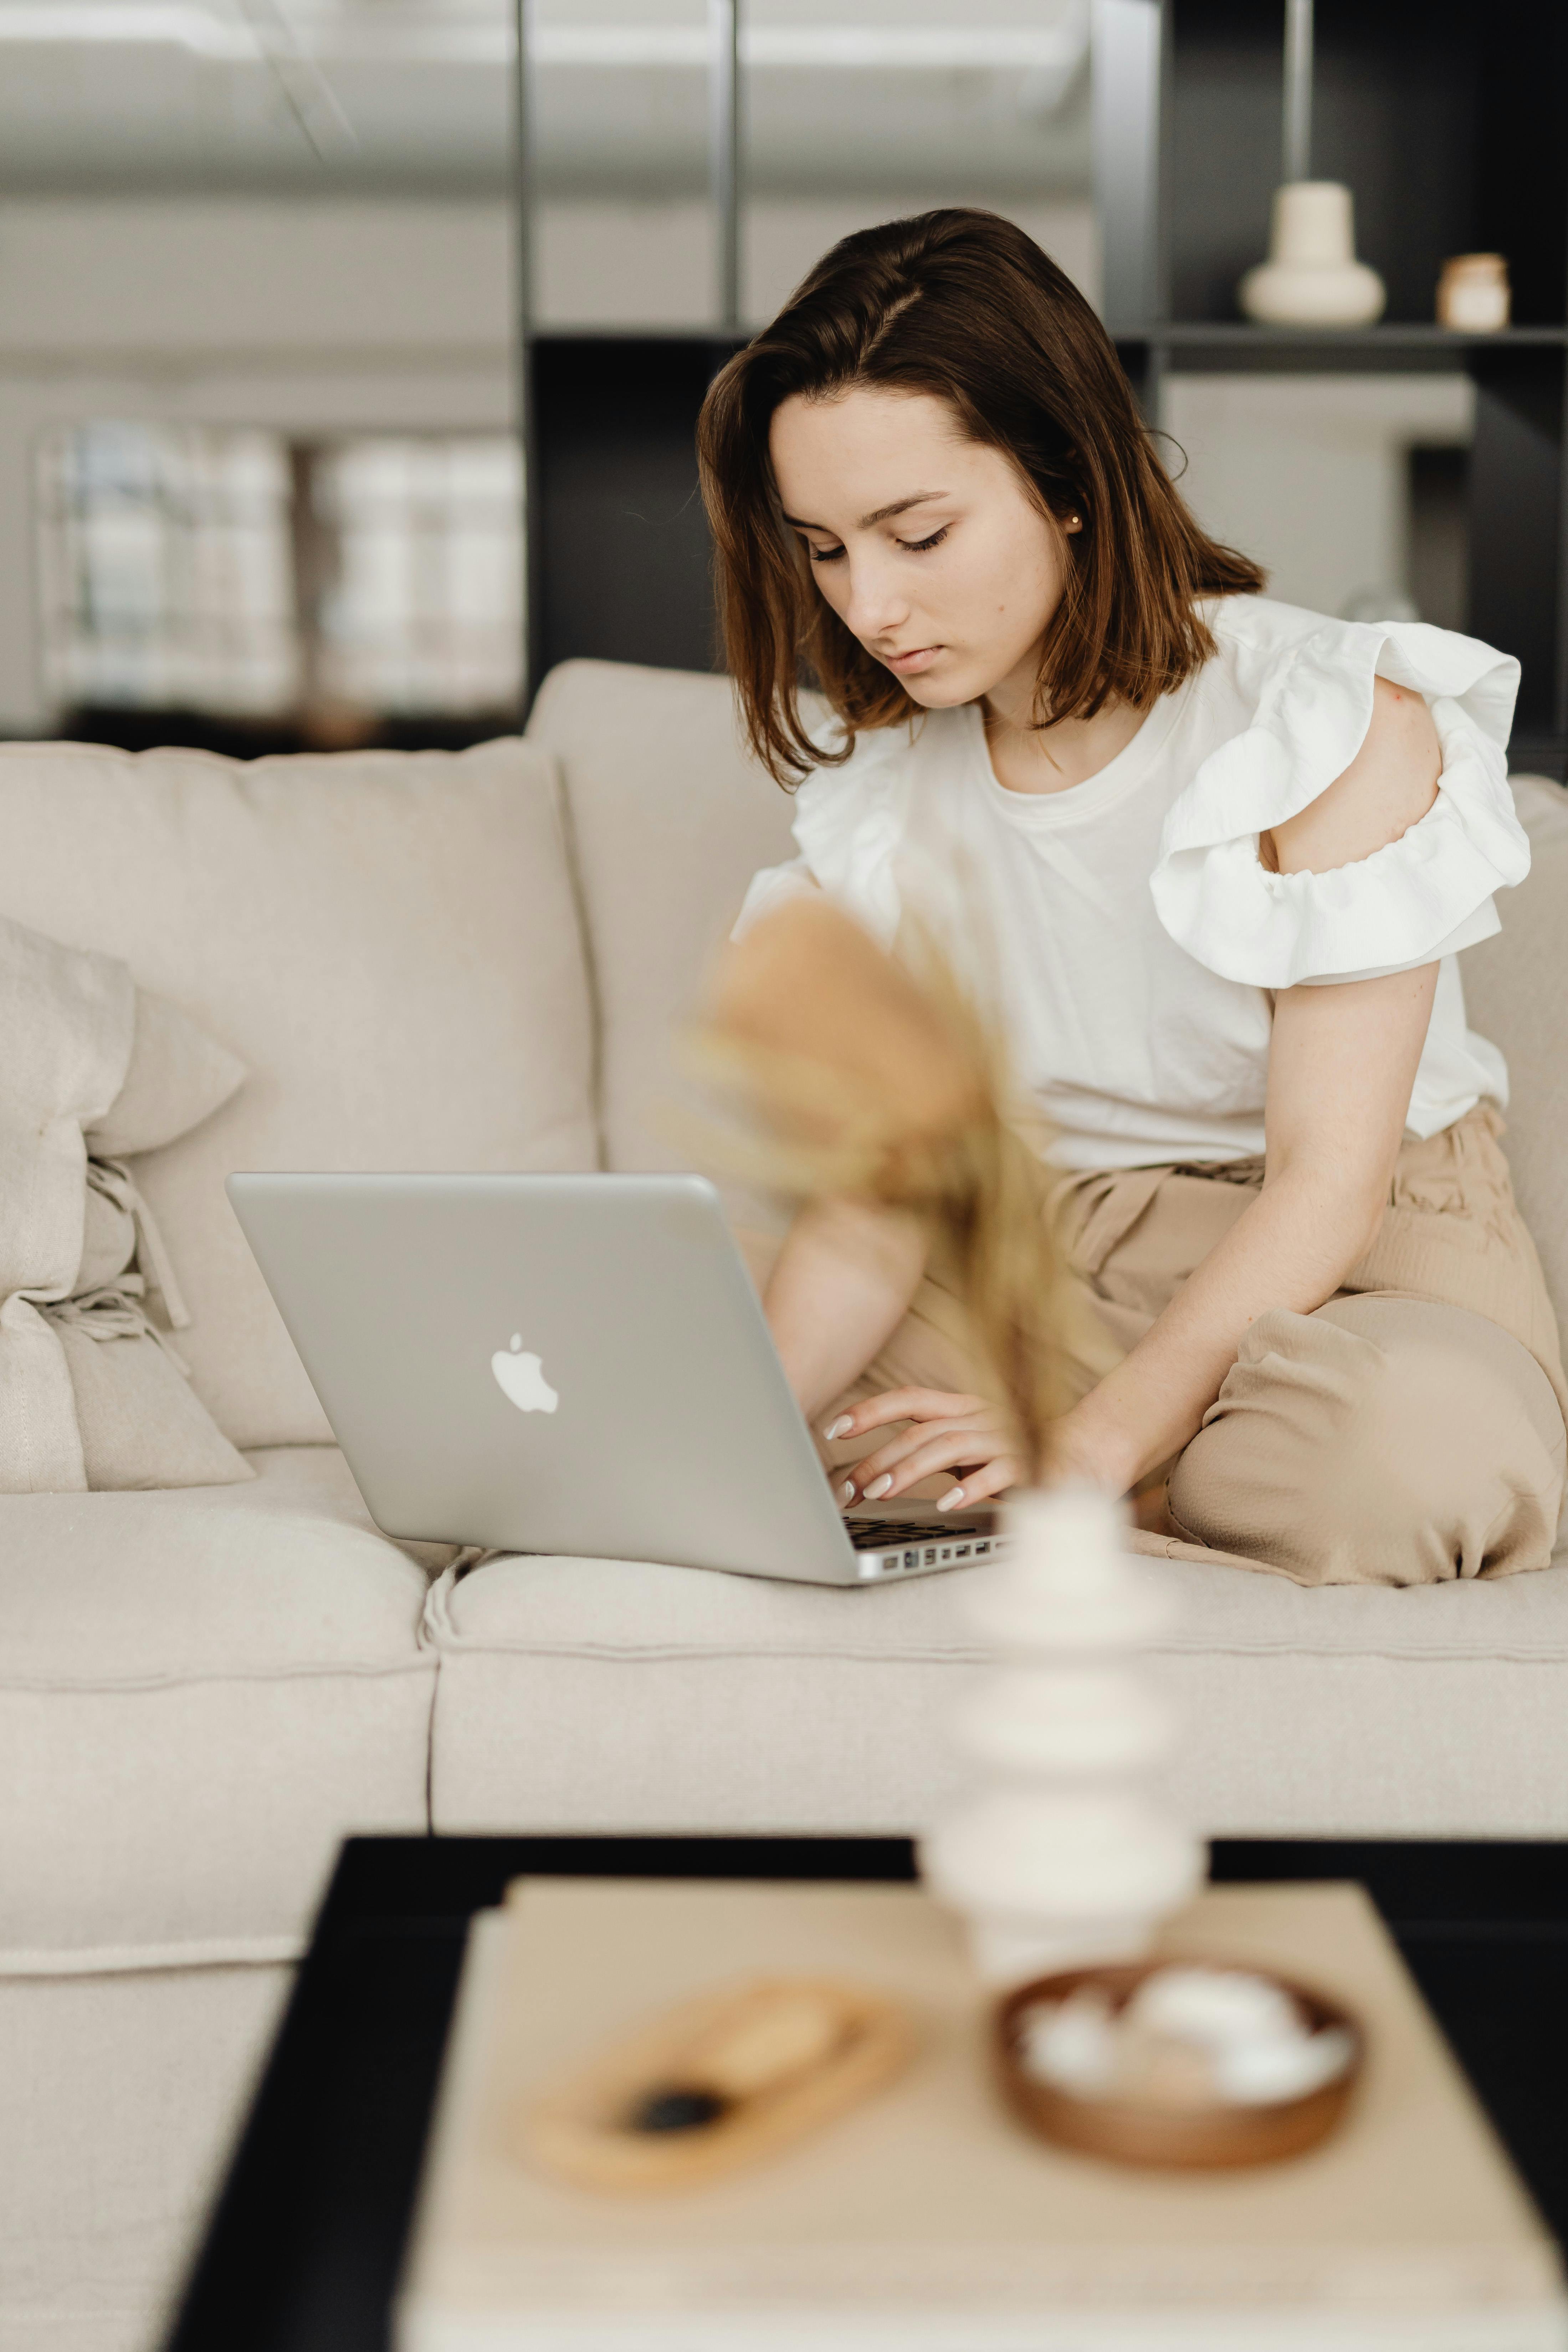 A woman on the couch typing on a Macbook | Source: Pexels